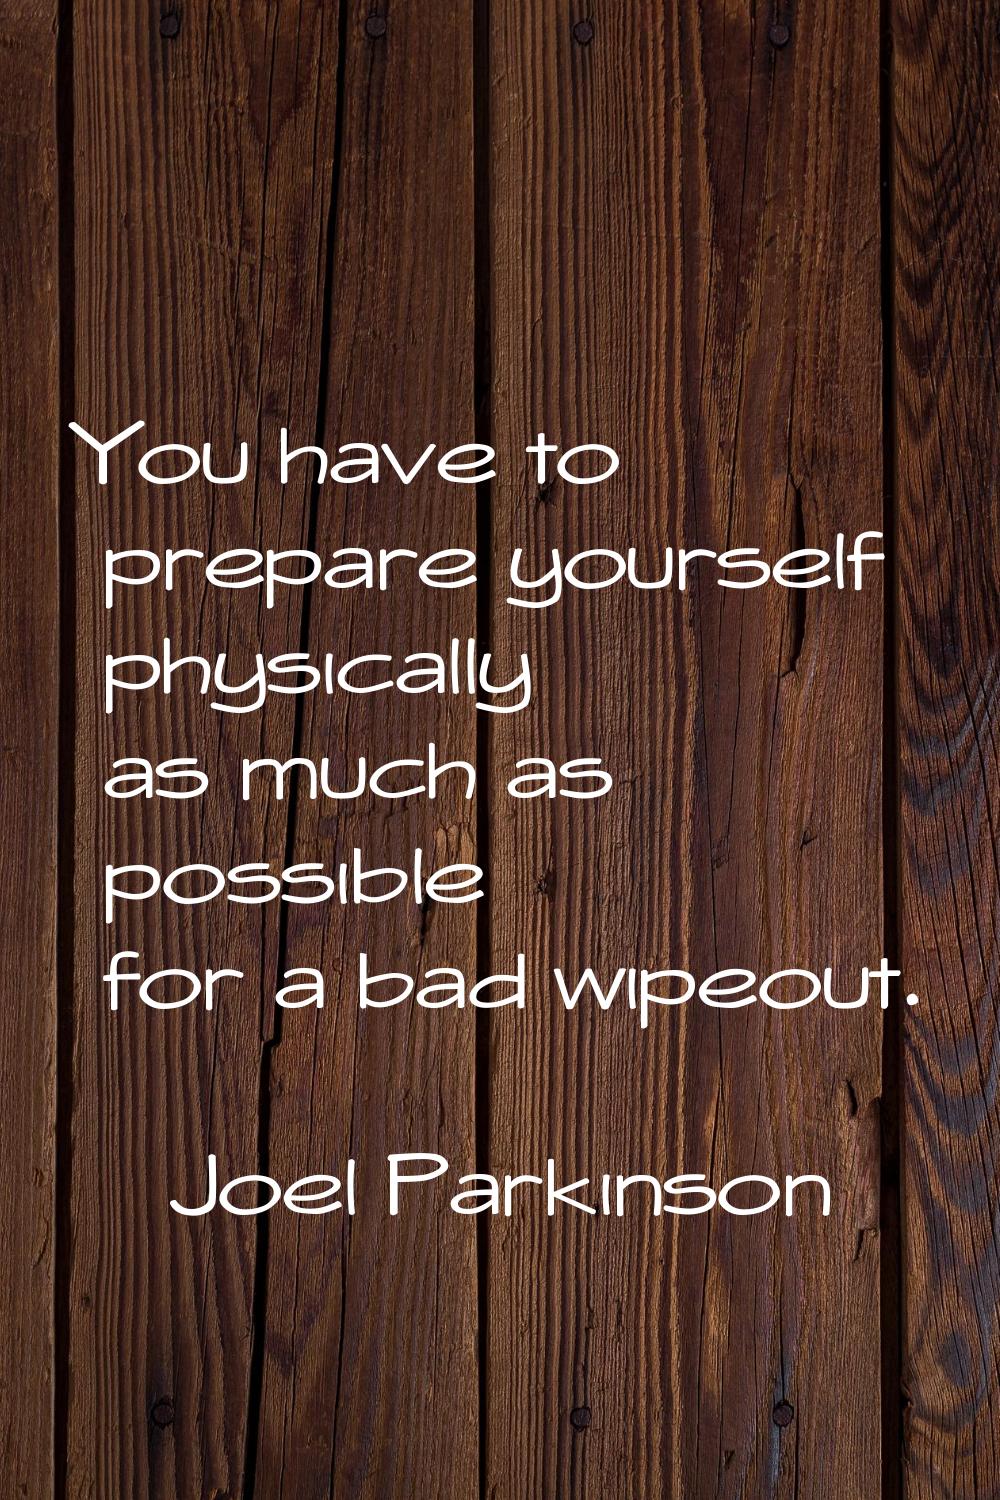 You have to prepare yourself physically as much as possible for a bad wipeout.